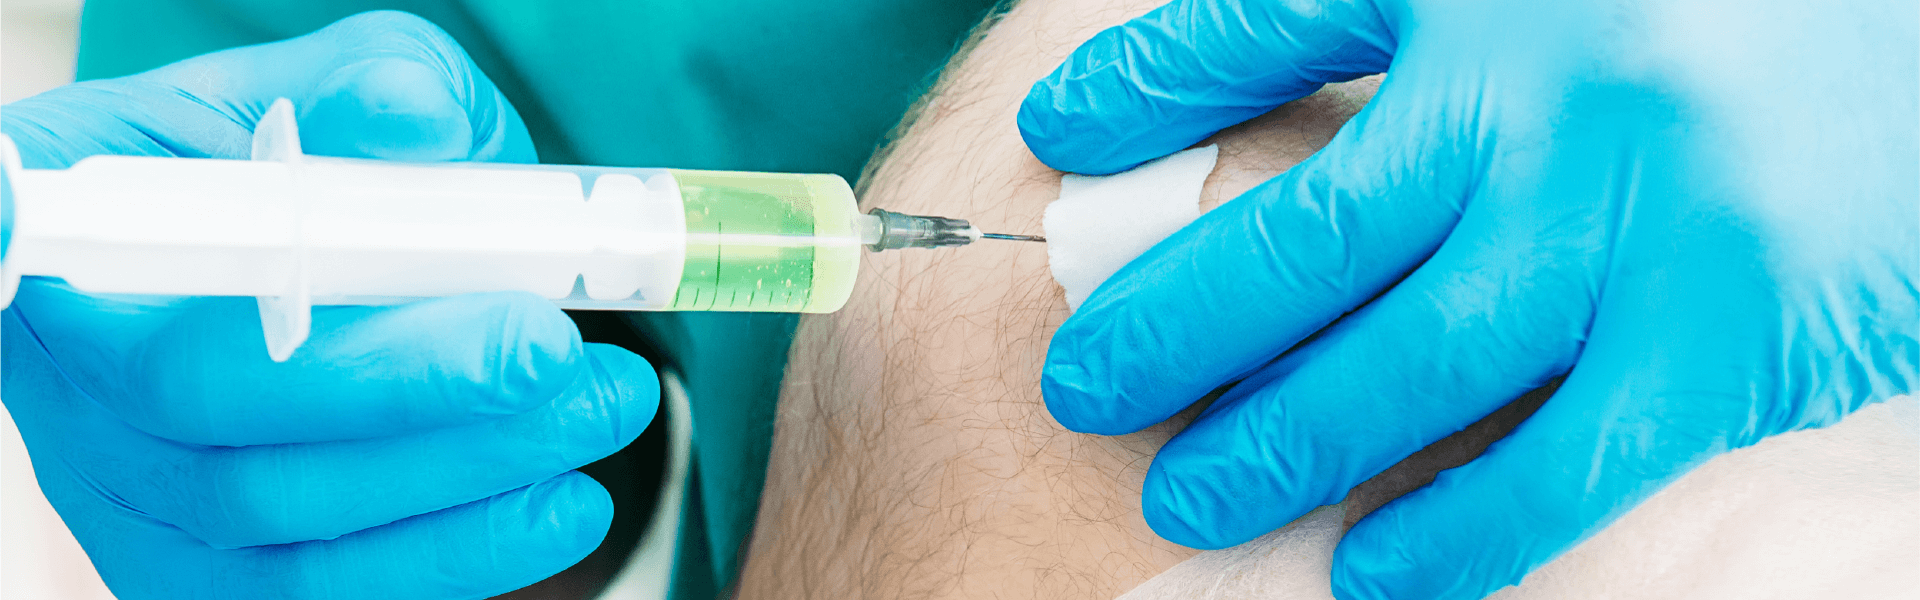 Intra Articular Injection | Manipal Hospital India